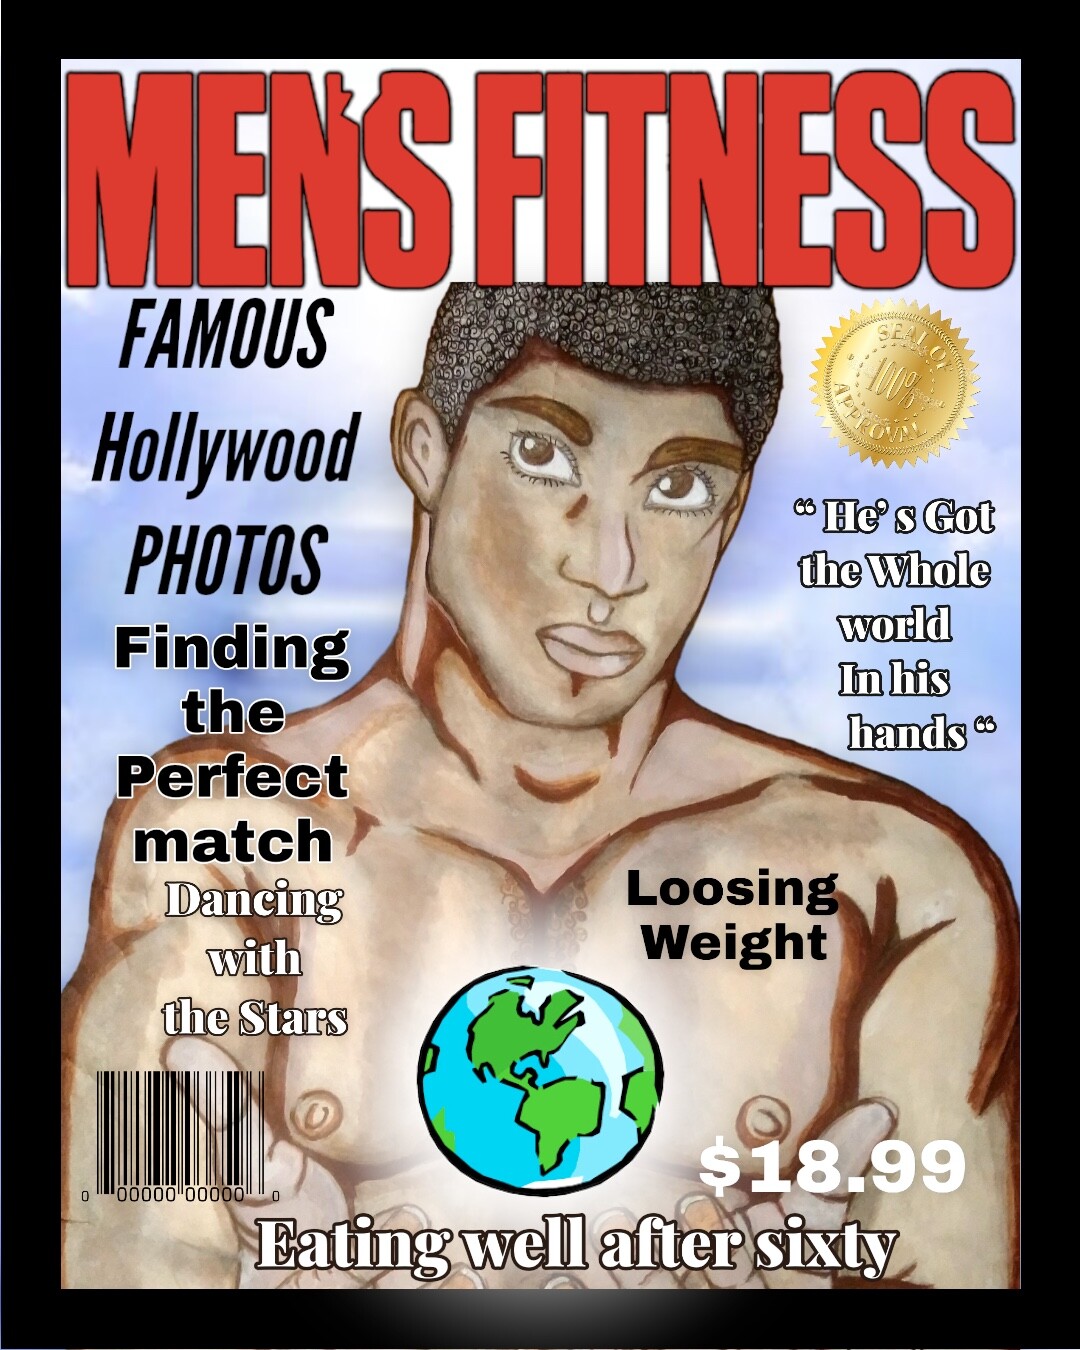 “ He’s got the whole world in his hands “ Mens Fitness Fictional Magazine Latout